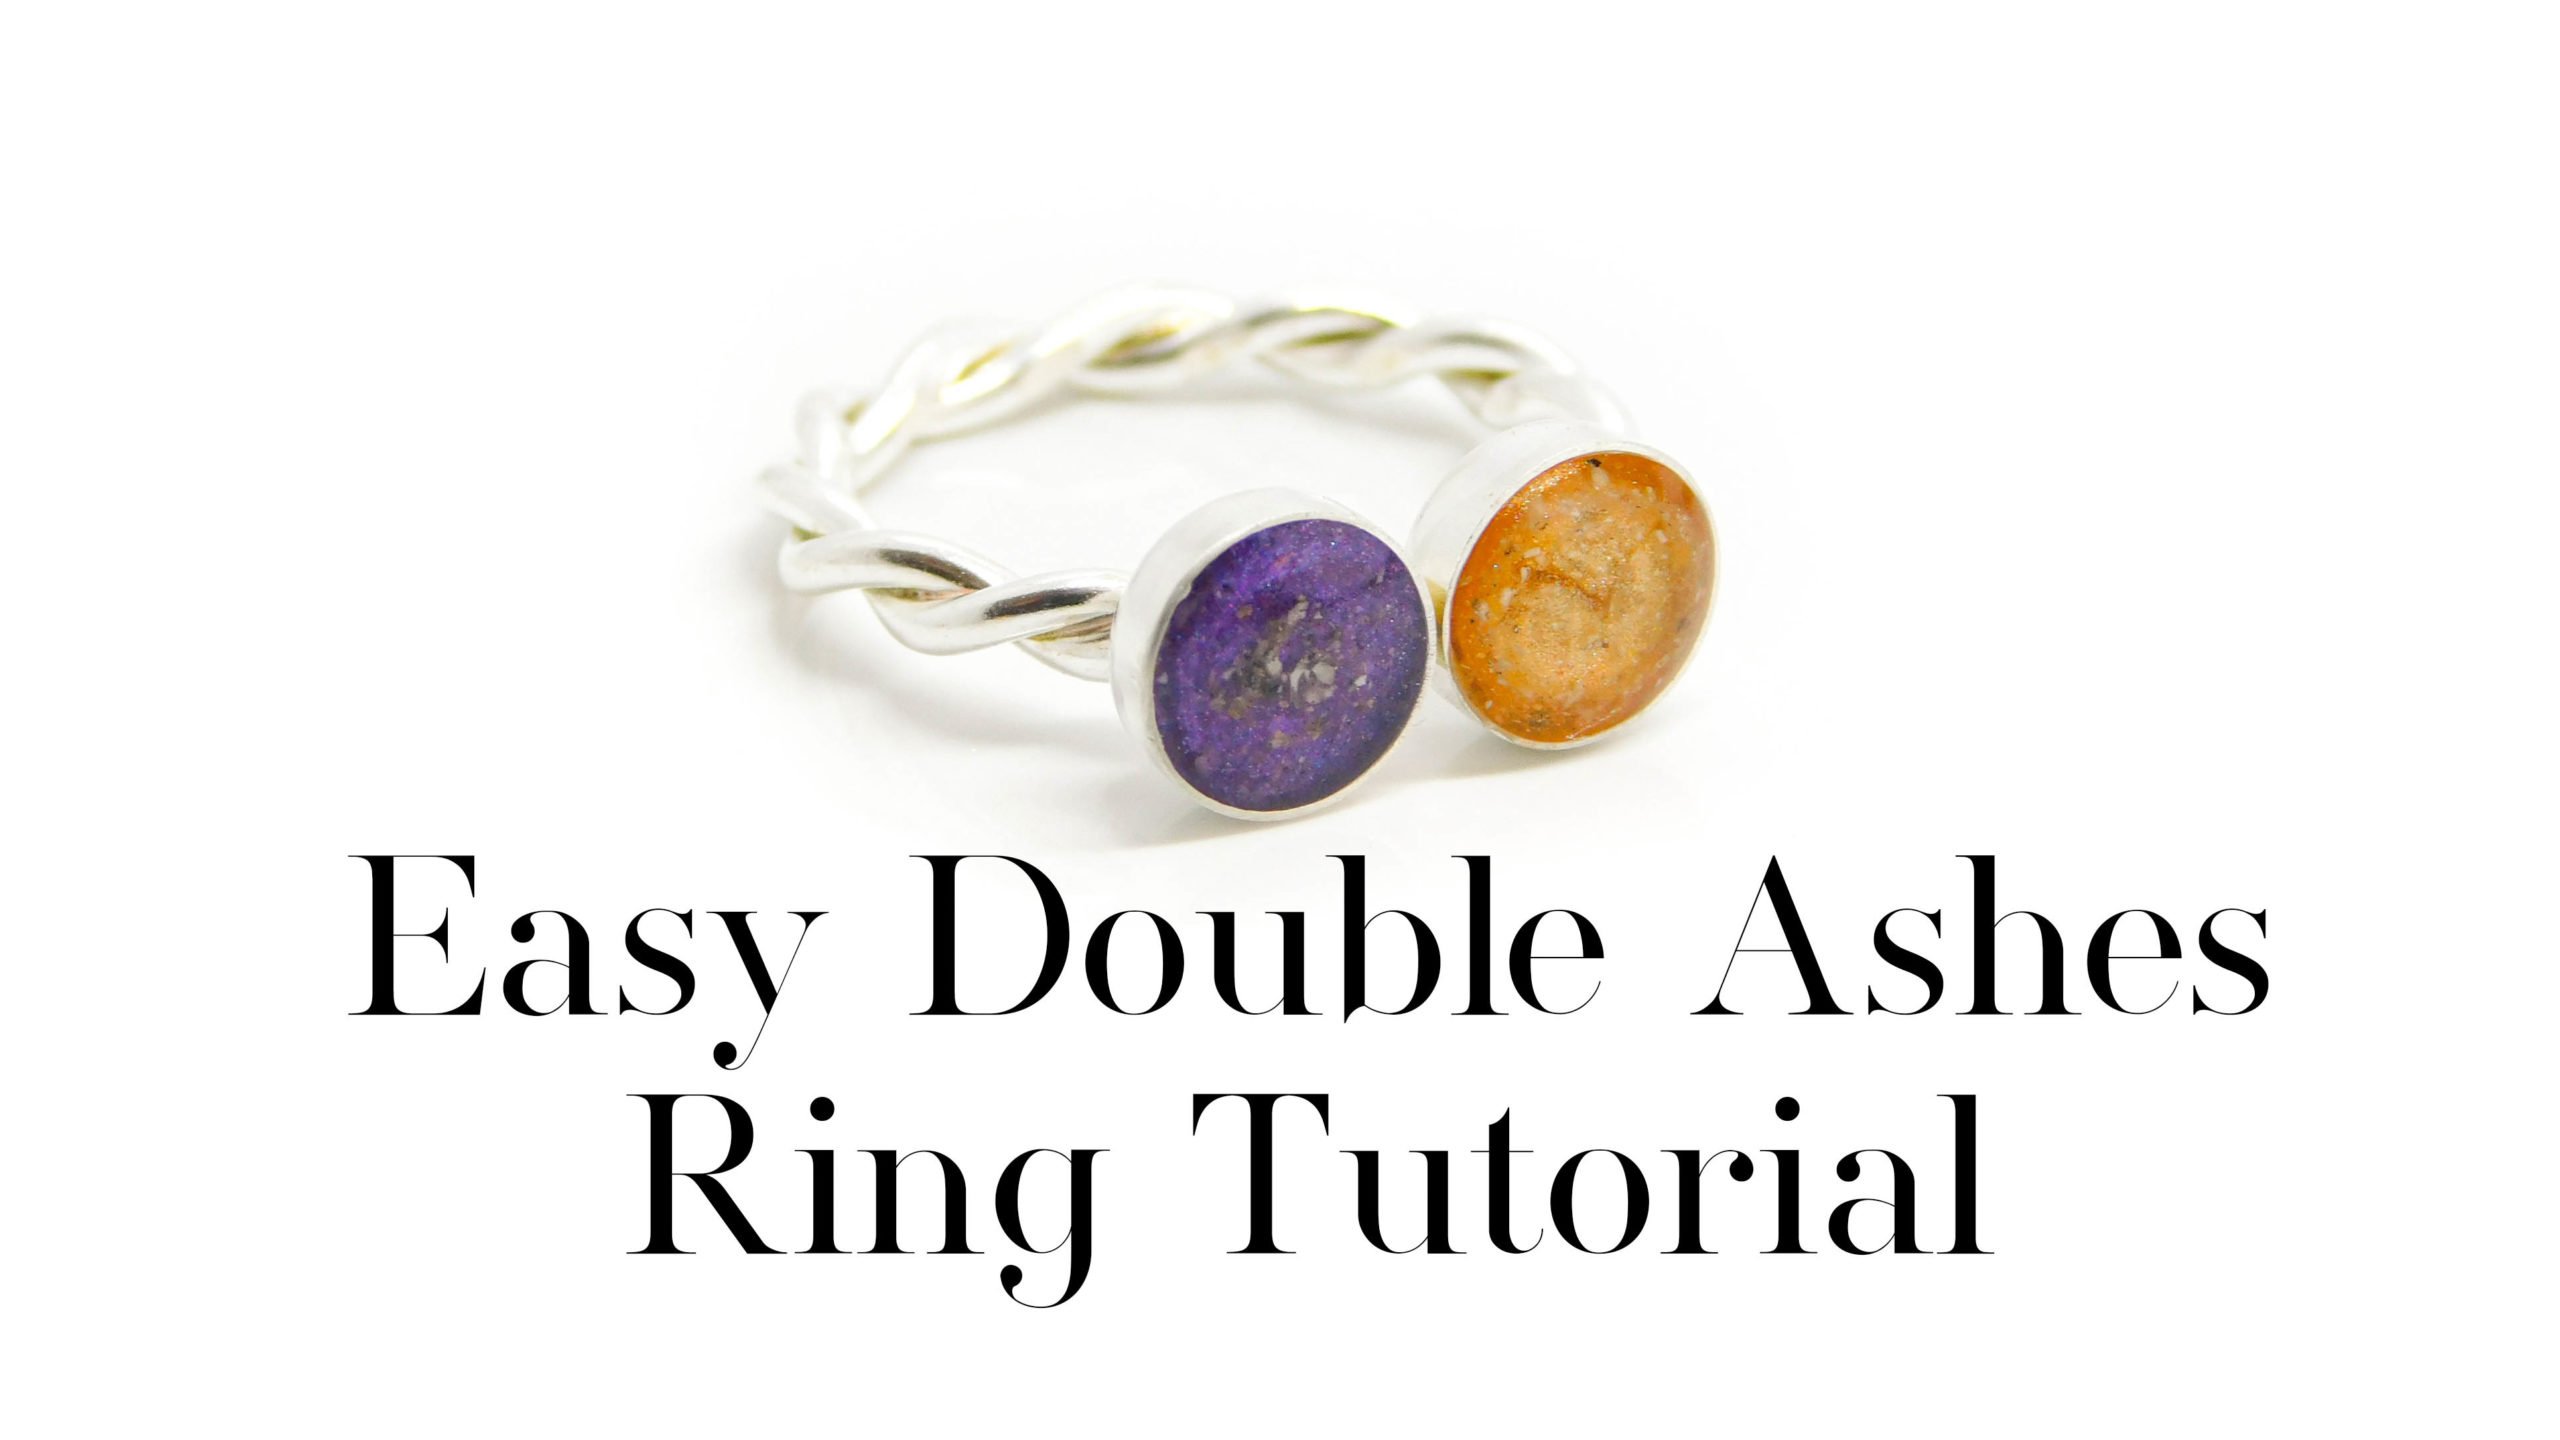 Easy Double Ashes Ring Tutorial ash duo silver ring purple orange. ashes duo ring citrine purple, solid silver twisted band setting with two grandparents' ashes. Cremains in yellow and orange sparkle mixes with citrine, and purple resin sparkle mix. 6mm direct pour bezel cup duo